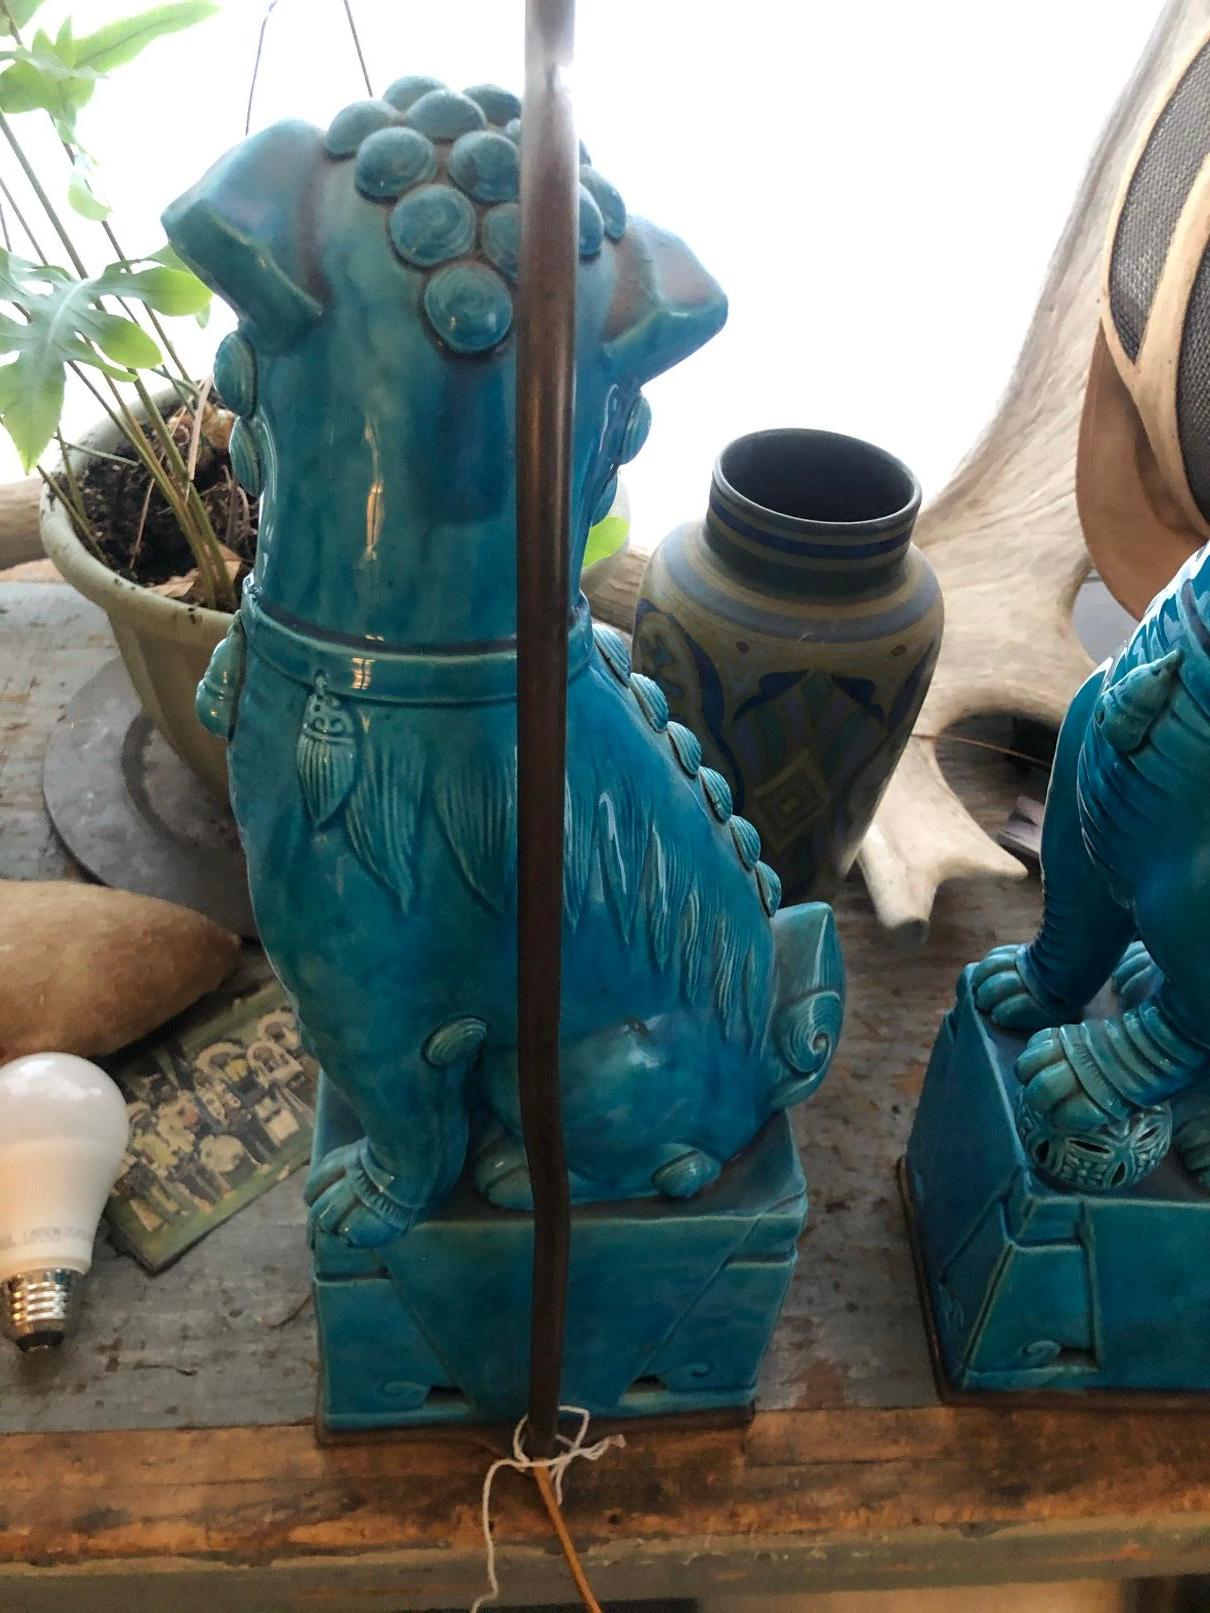 A wonderful pair of vintage Chinese Foo dog statues converted into small table lamps. These dog lamps were the property of Valley Castle in Cornwall Connecticut. 
Fu dogs are actually lions. They originated in China, shi, meaning lion, yet they